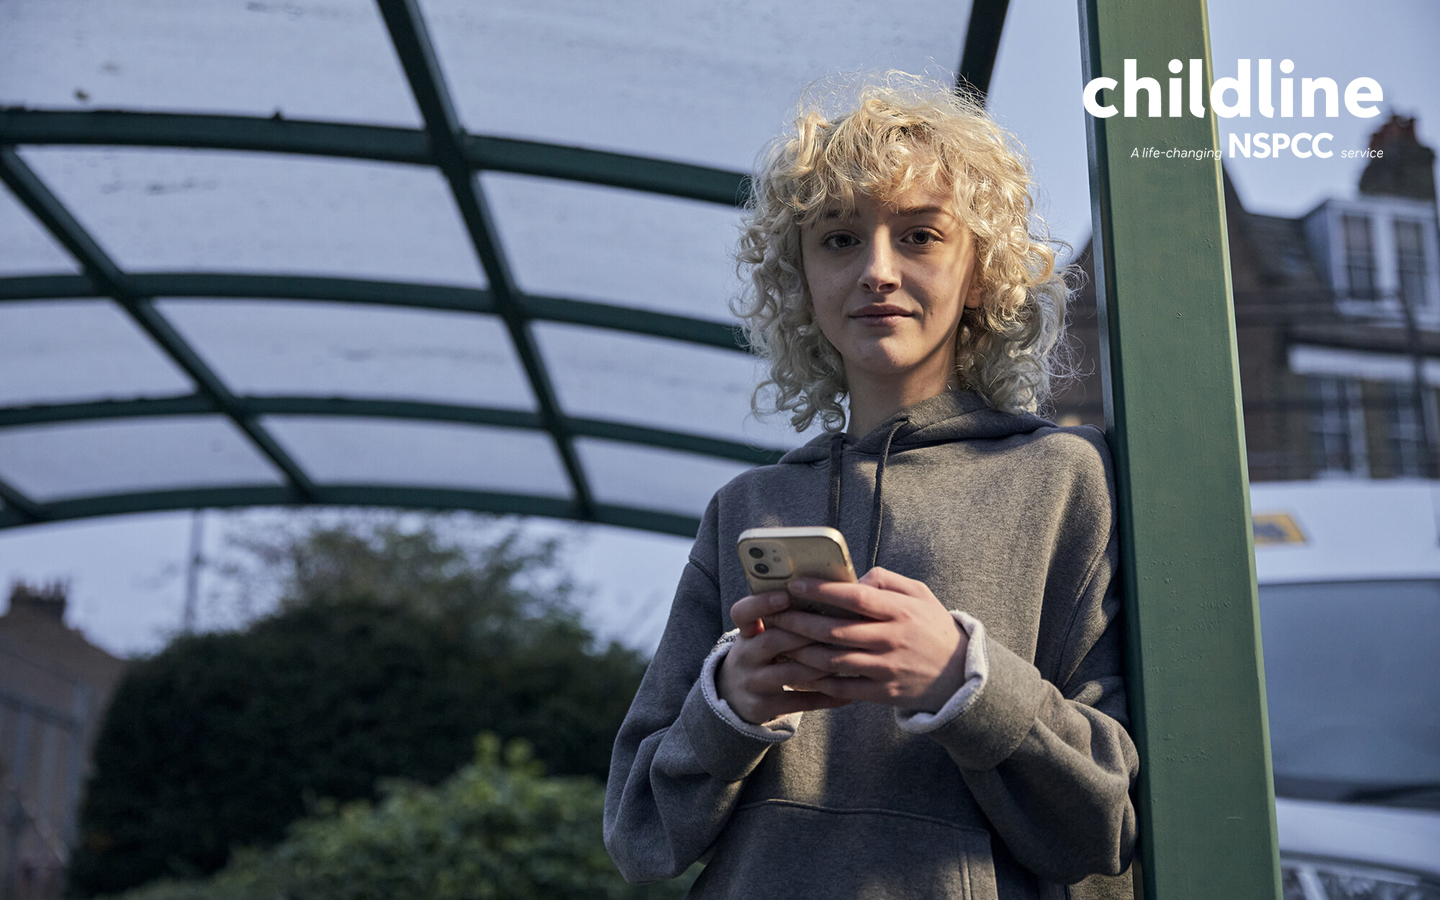 A teenage girl using her phone outside a bus stop while smiling into the camera. A white NSPCC and Childline logo lockup is layered into the top right corner of the image which says 'Childline: a life-saving NSPCC service'.